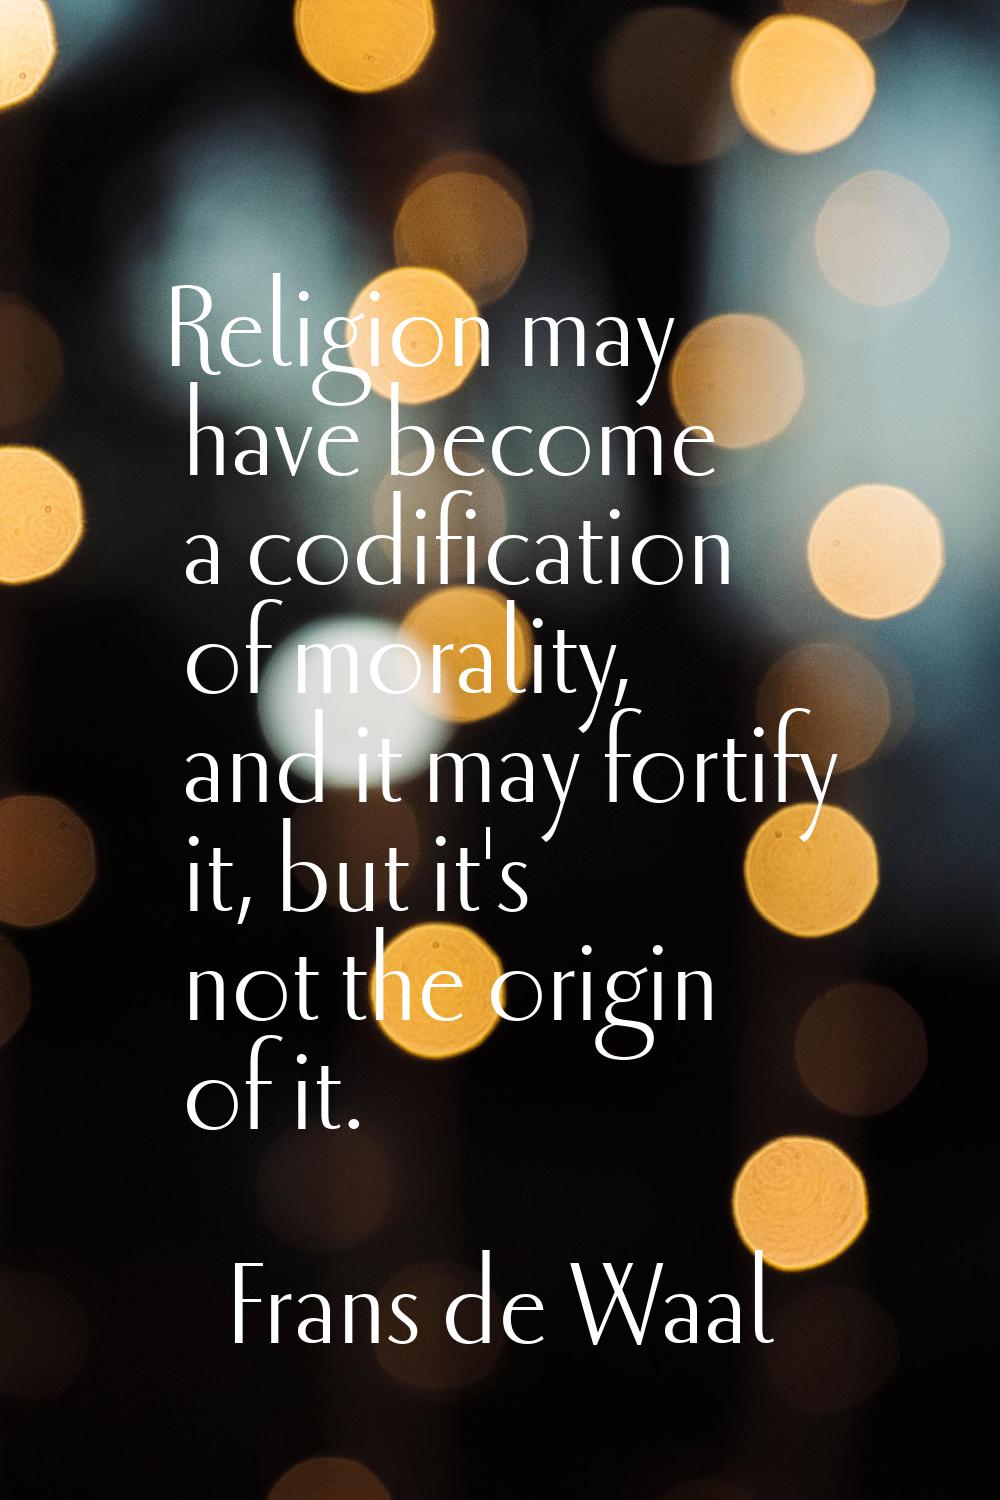 Religion may have become a codification of morality, and it may fortify it, but it's not the origin